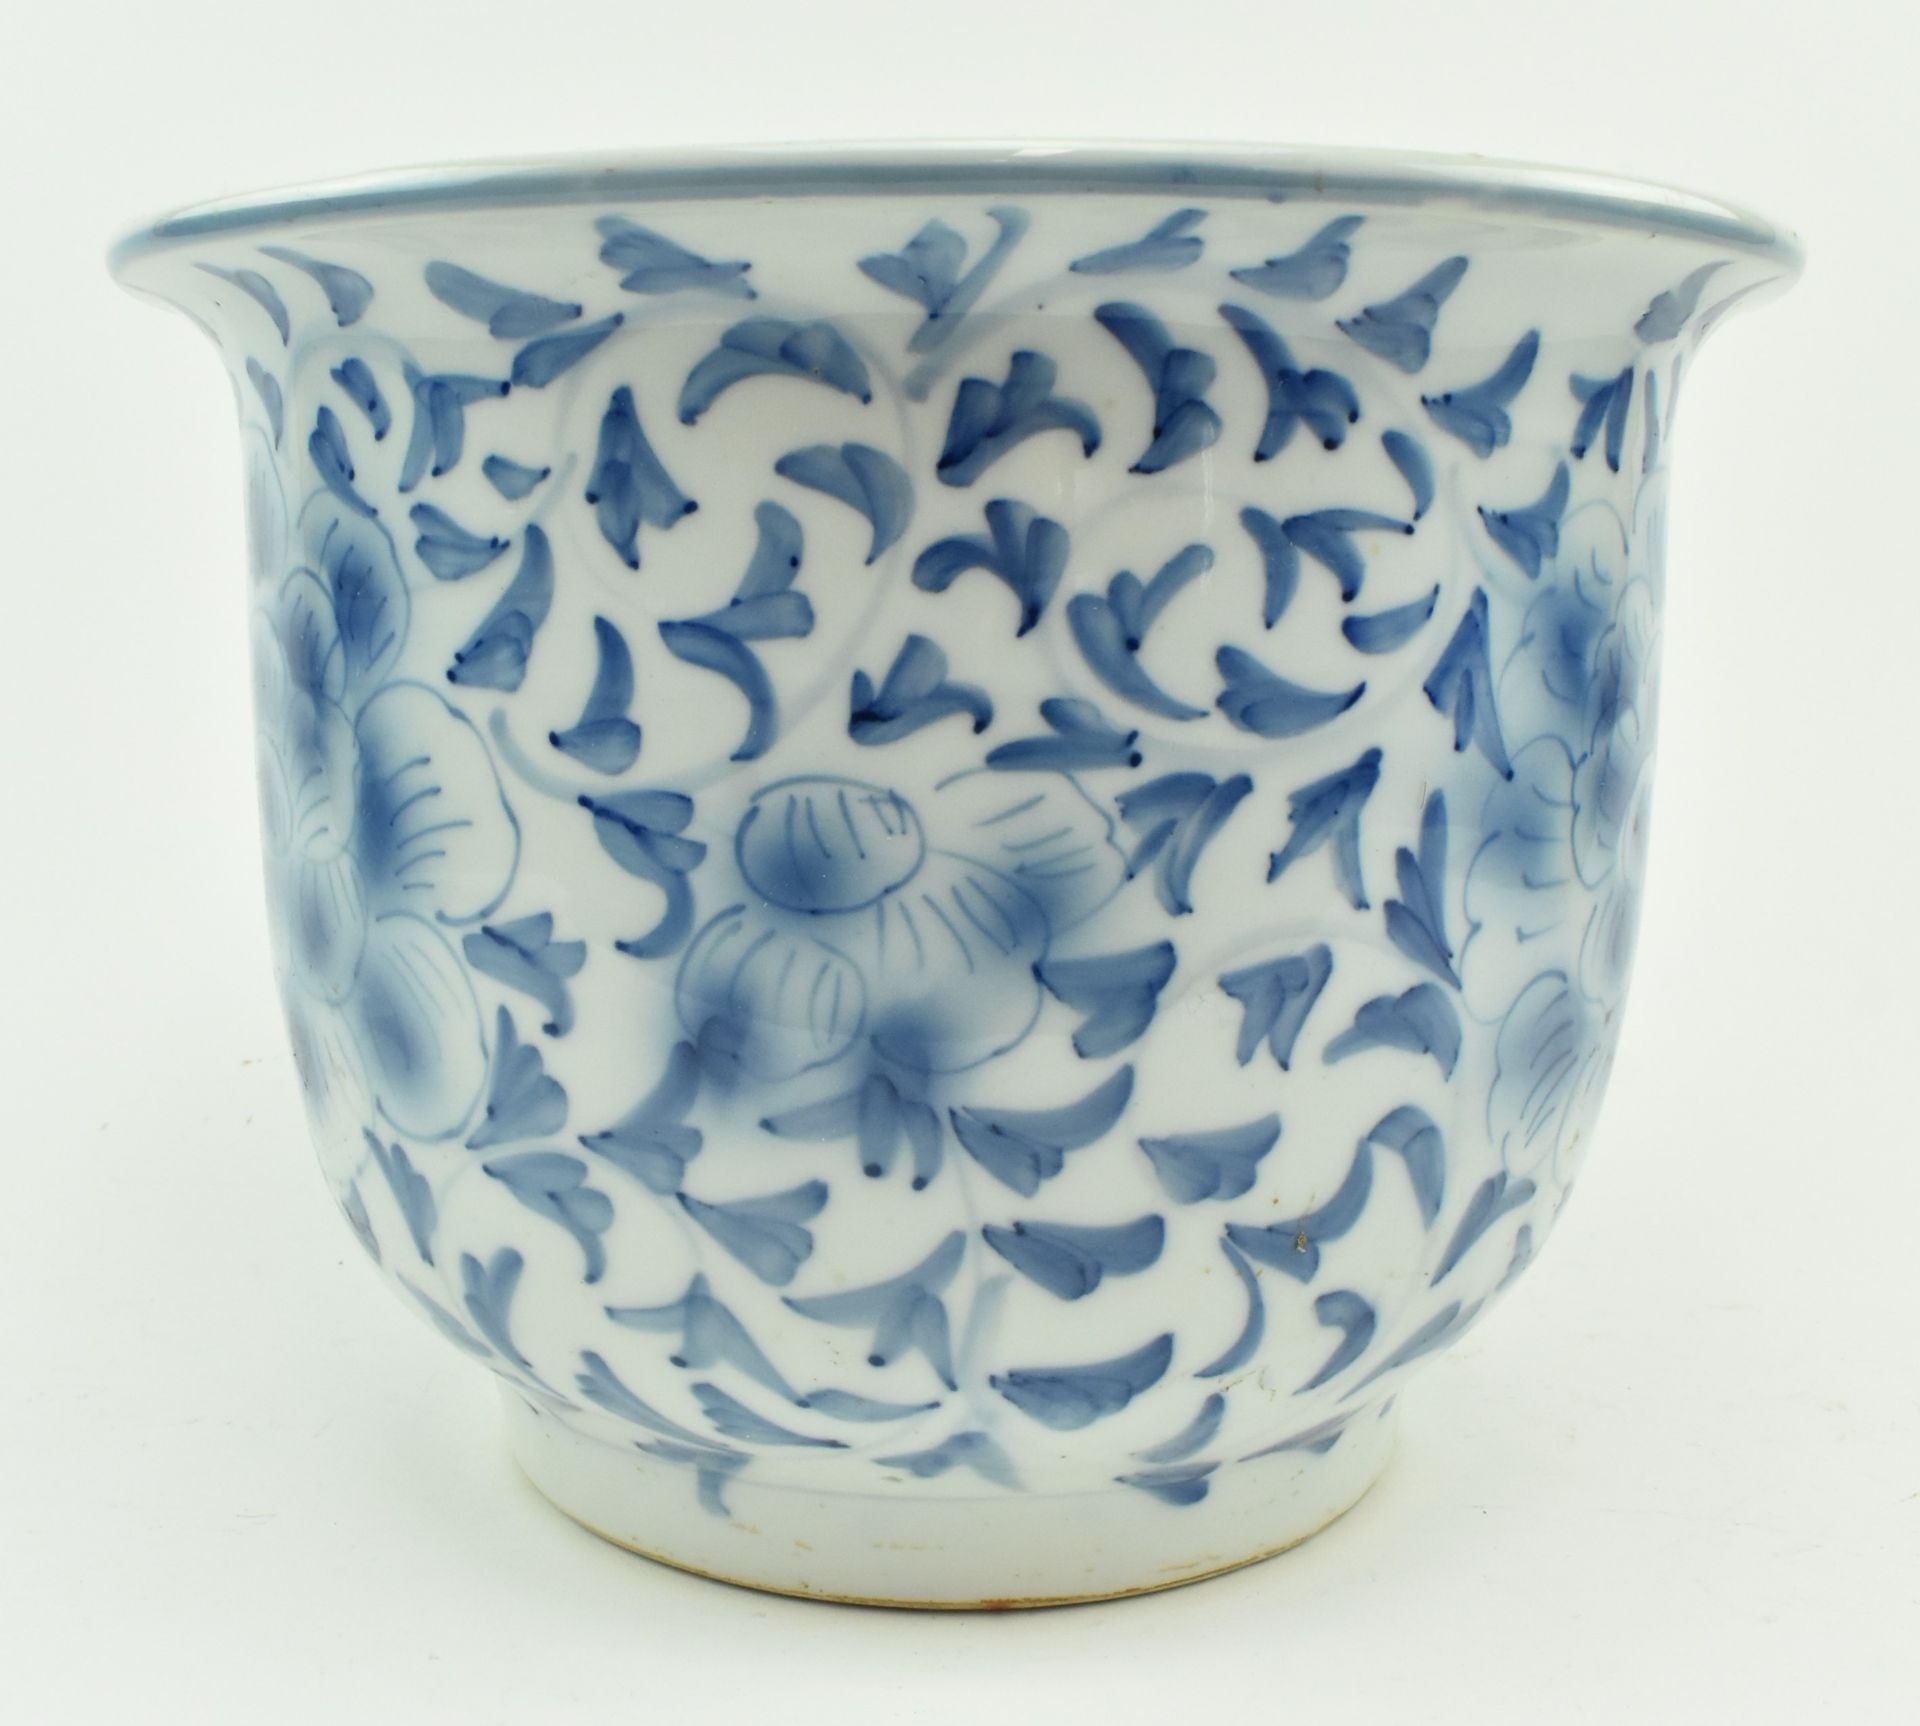 VINTAGE CHINESE BLUE AND WHITE CERAMIC PEONY PLANTER - Image 3 of 5